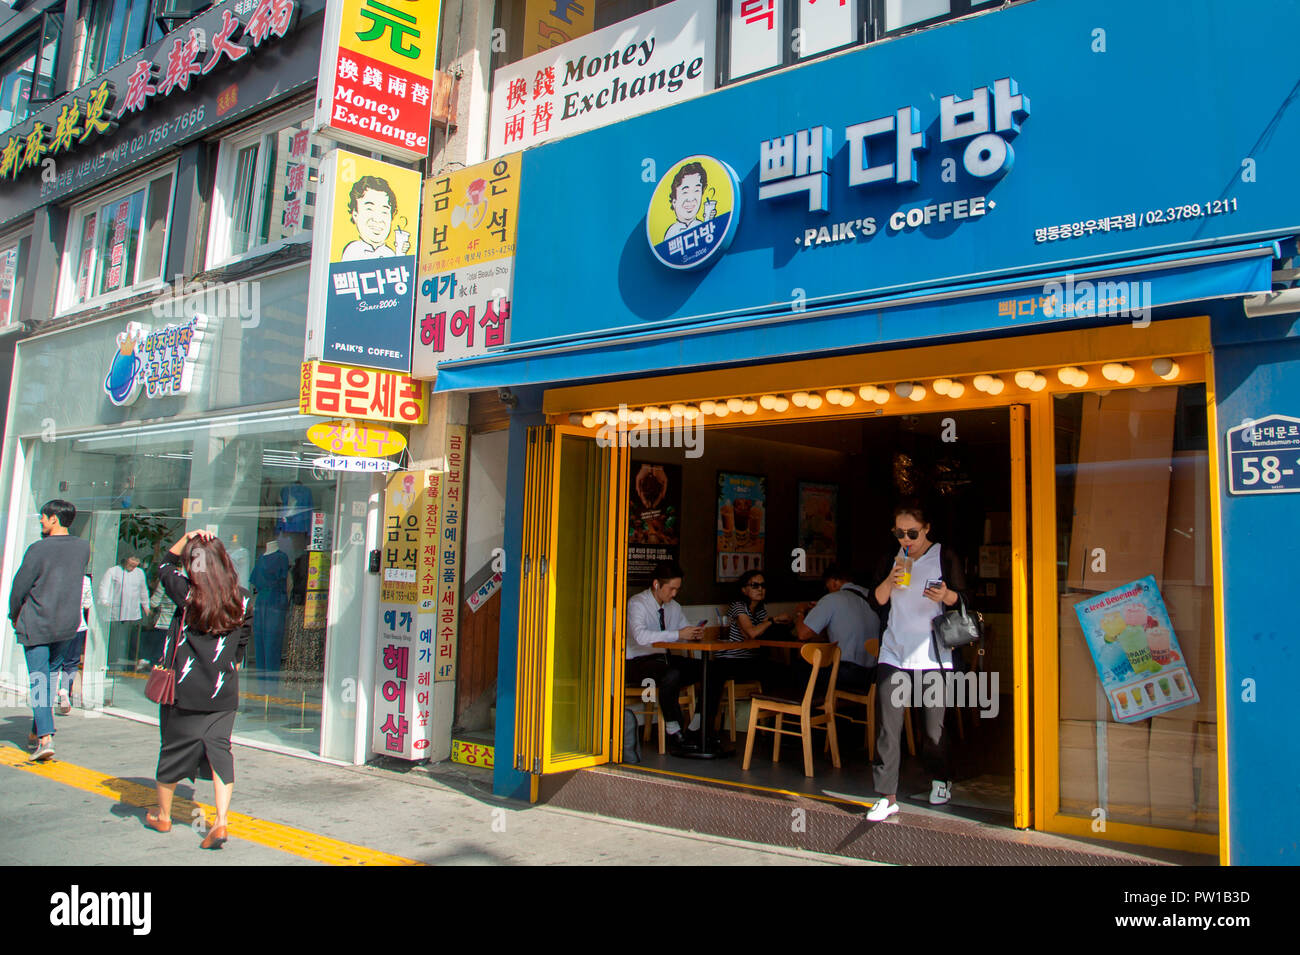 Paik's Coffee, Oct 4, 2018 : A branch of Paik's Coffee, one of major low-priced coffee drink retailers in South Korea, is seen at Myeongdong in central Seoul, South Korea. Paik's Coffee is headed by CEO Paik Jong-Won of parent company The Born Korea. Chef-entrepreneur Paik Jong-Won became a public figure after marrying famous actress So Yoo-Jin in 2013 as he has since appeared in many local TV shows. Credit: Lee Jae-Won/AFLO/Alamy Live News Stock Photo